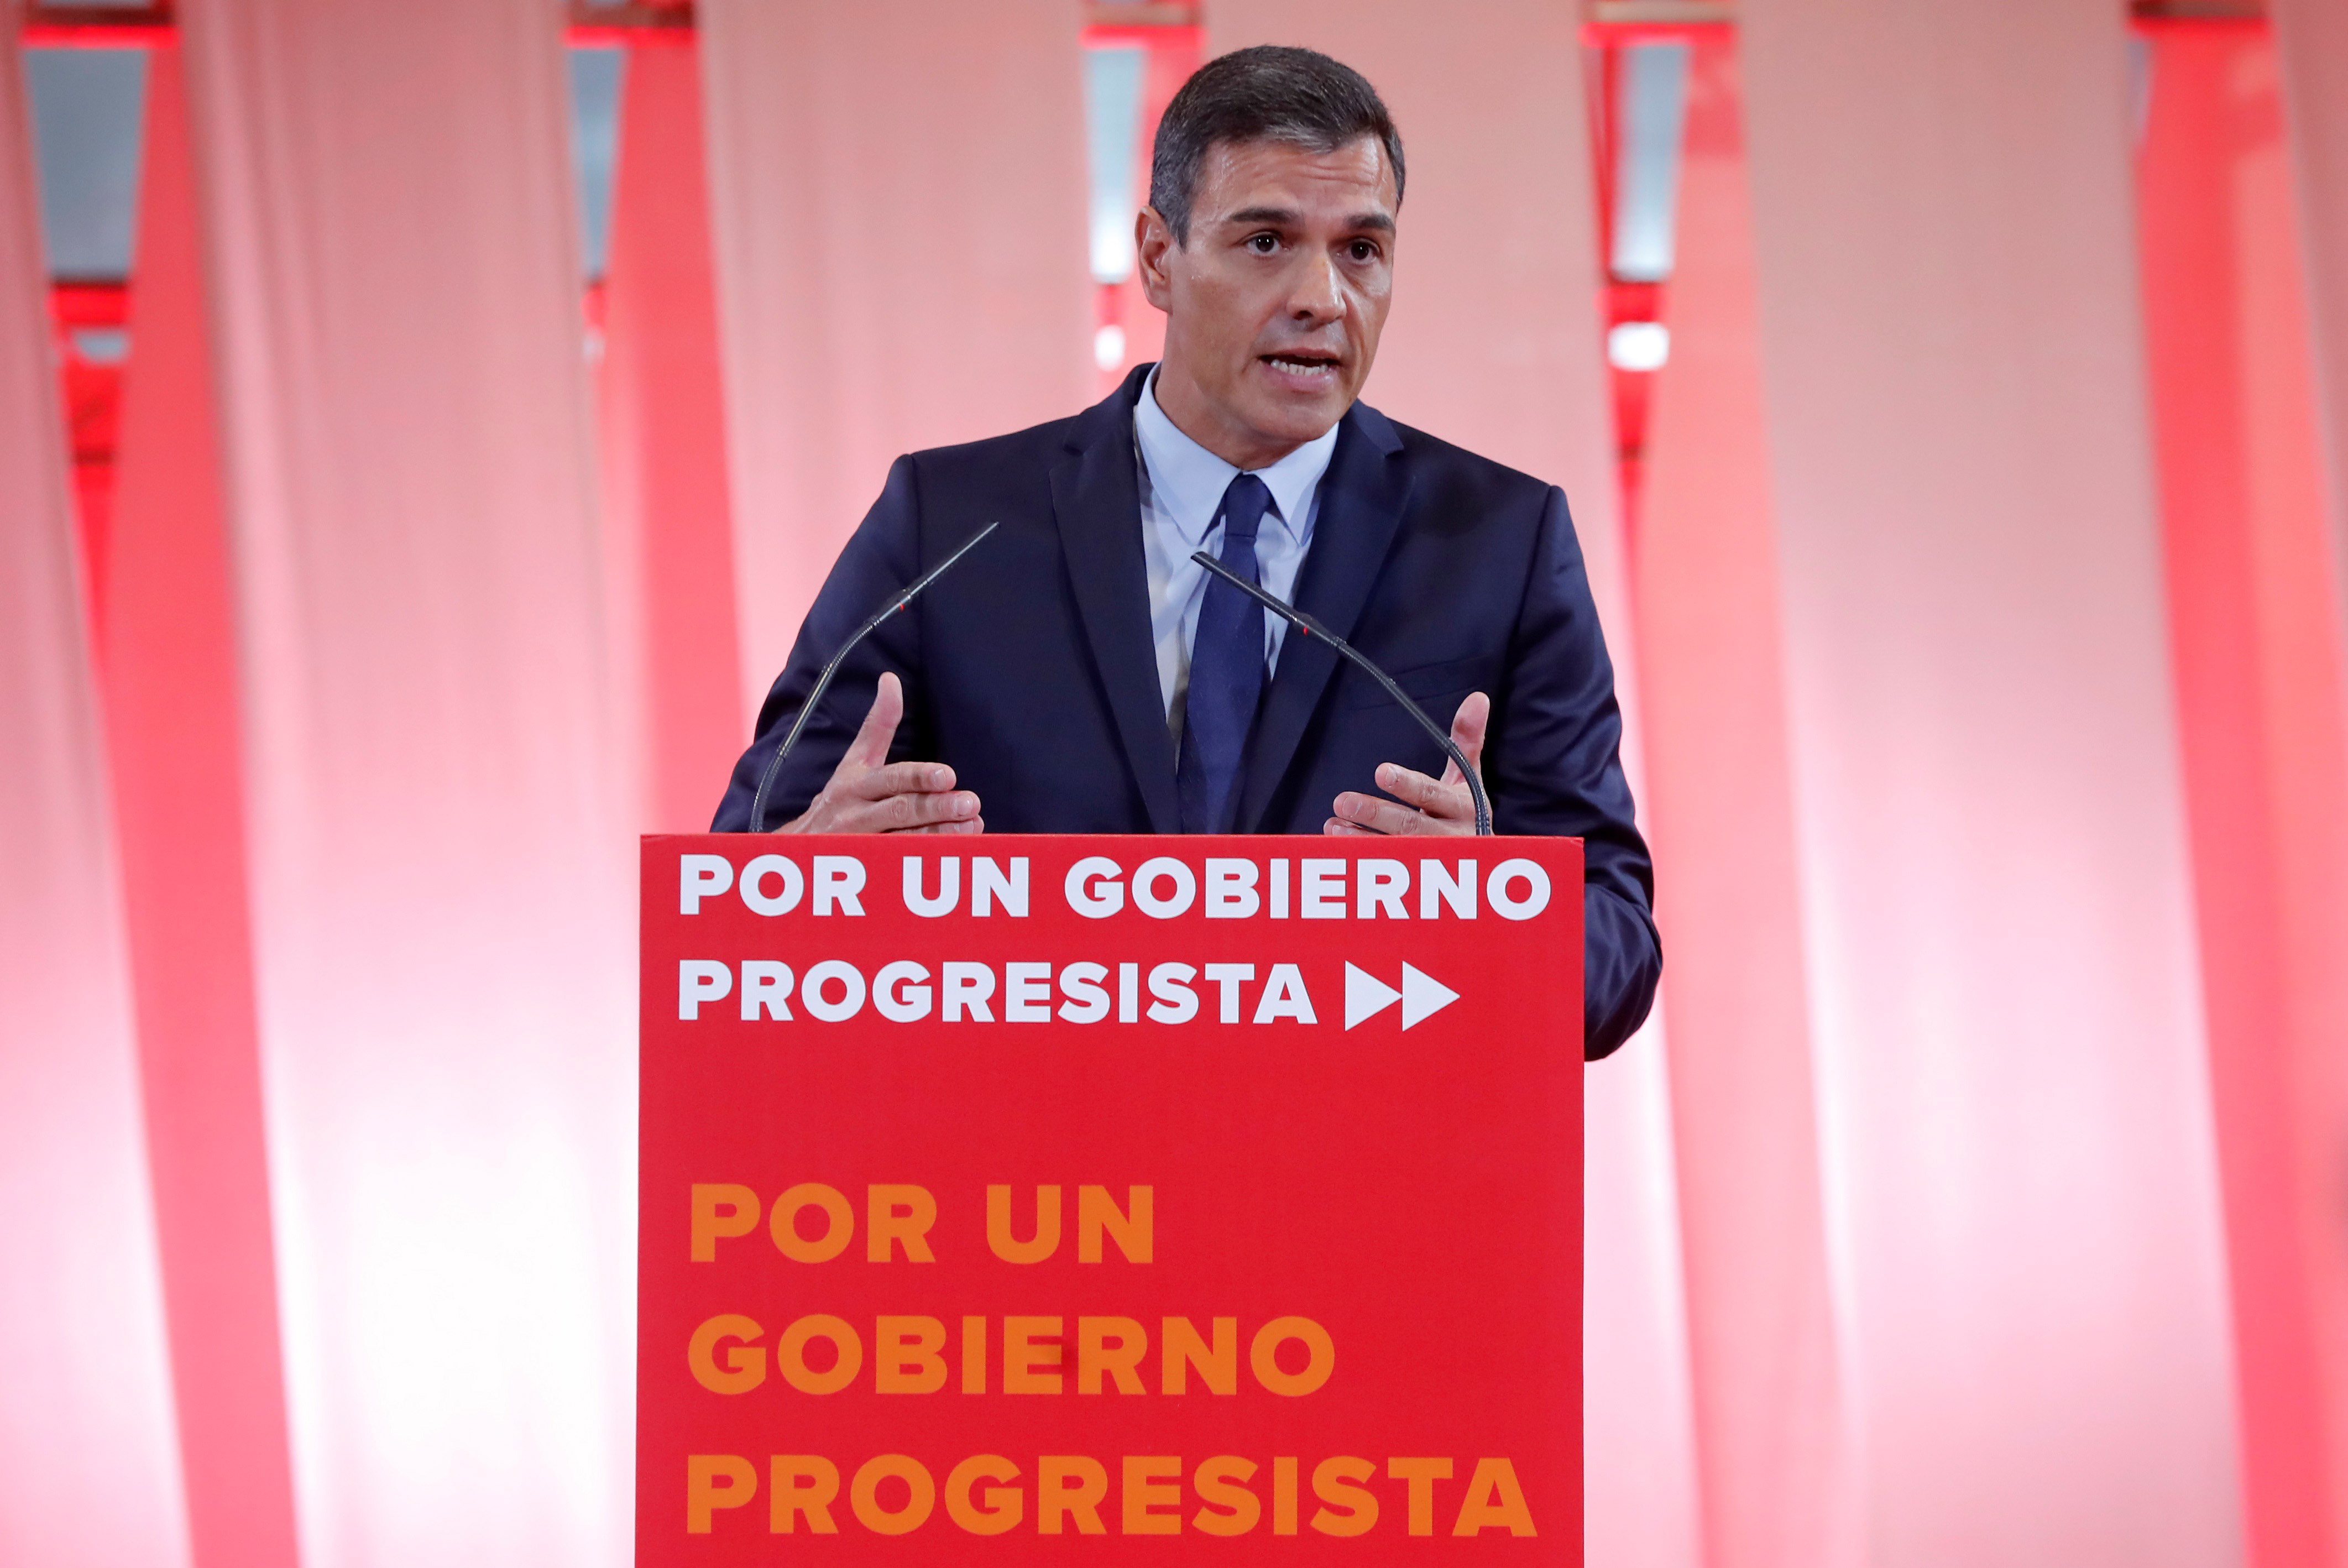 epa07814441 Spanish Prime Minister, Pedro Sanchez, presents the socialist program for a progressive Government in Madrid, Spain, 03 September 2019. Sanchez presented the program to obtain enough votes from other political parties at Parliament to be invested Prime Minister later this month. Spain will be holding elections 10 November 2019 if Sanchez fails to obtain enough support for a new investiture in September.  EPA/Chema Moya